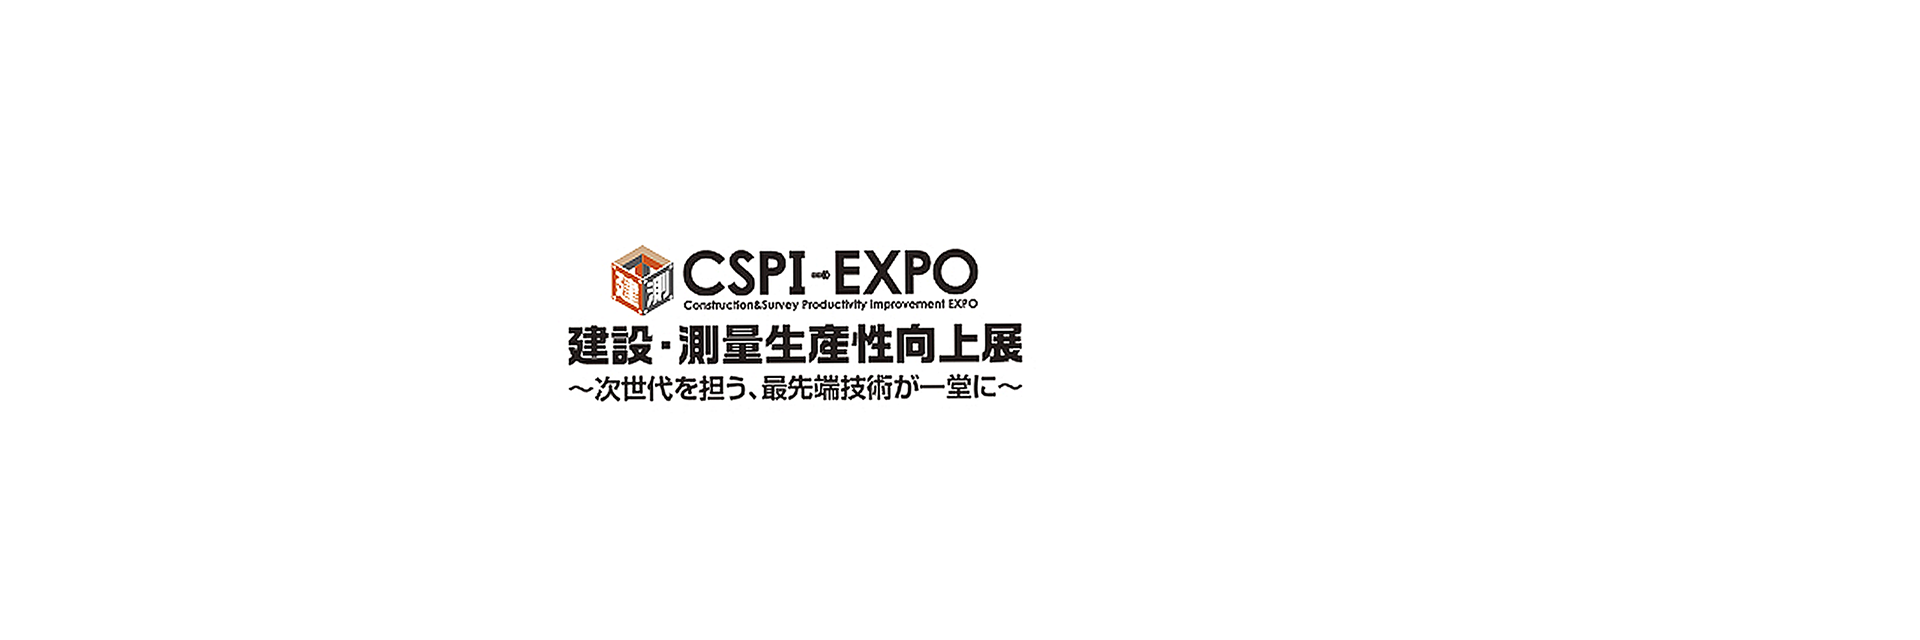 CHC Navigation will be exhibiting at the CSPI-EXPO 2023, from 24 to 26 May, in Makuhari Messe, Tokyo, Japan.